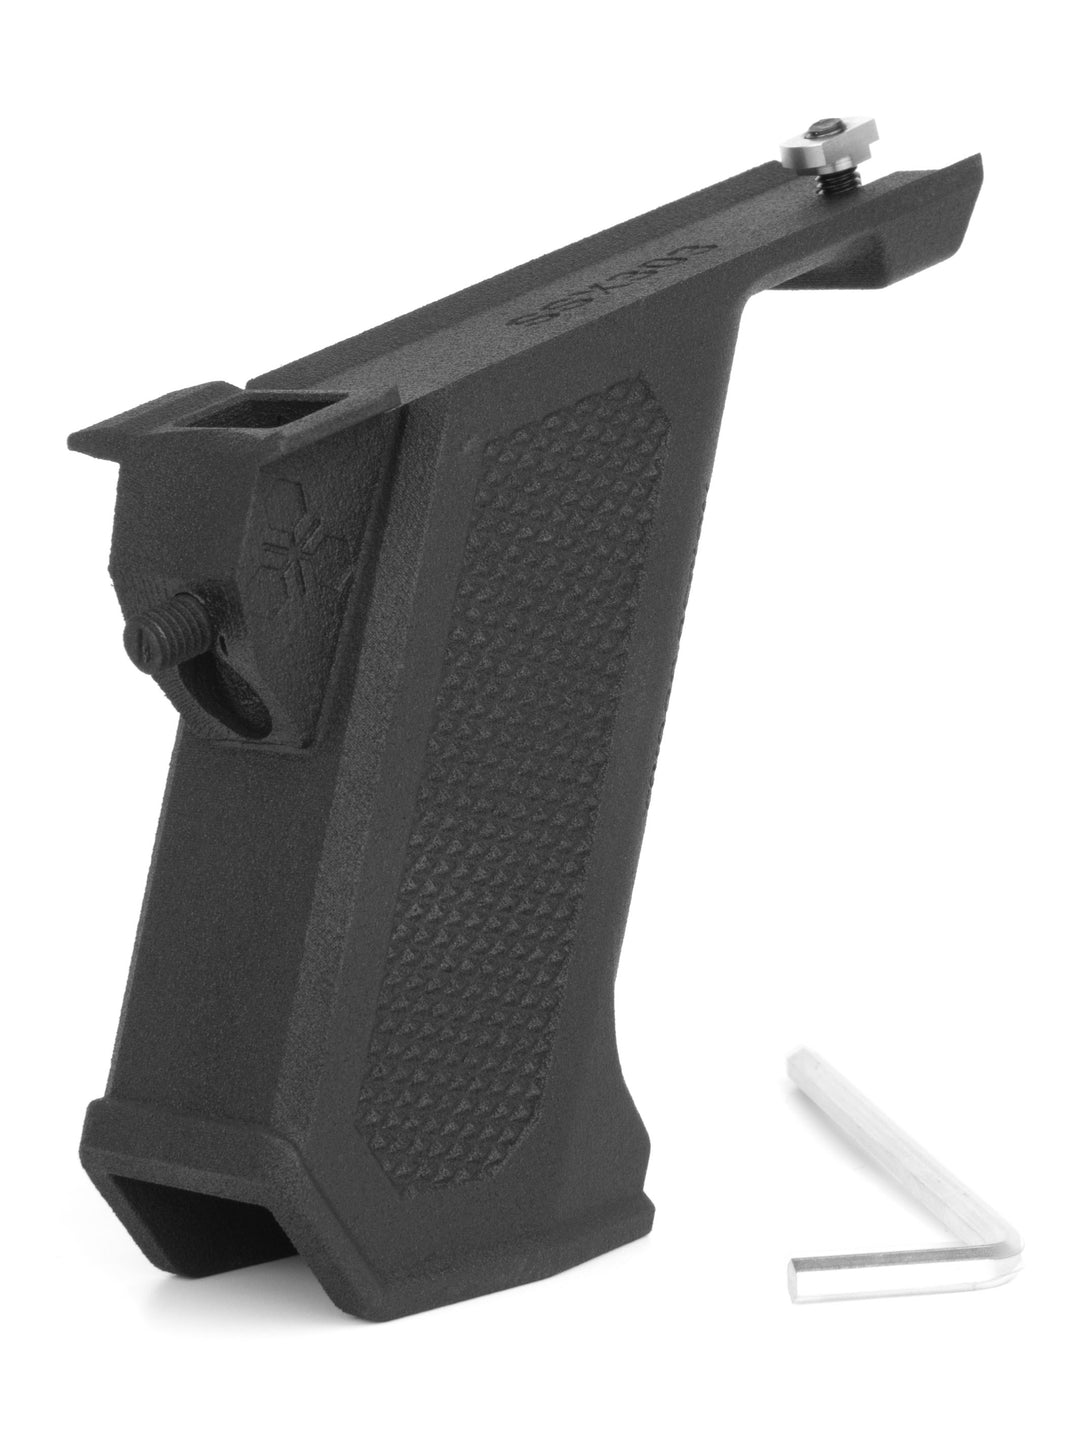 ssx303 angled spare mag grip and an allen key that's included with it